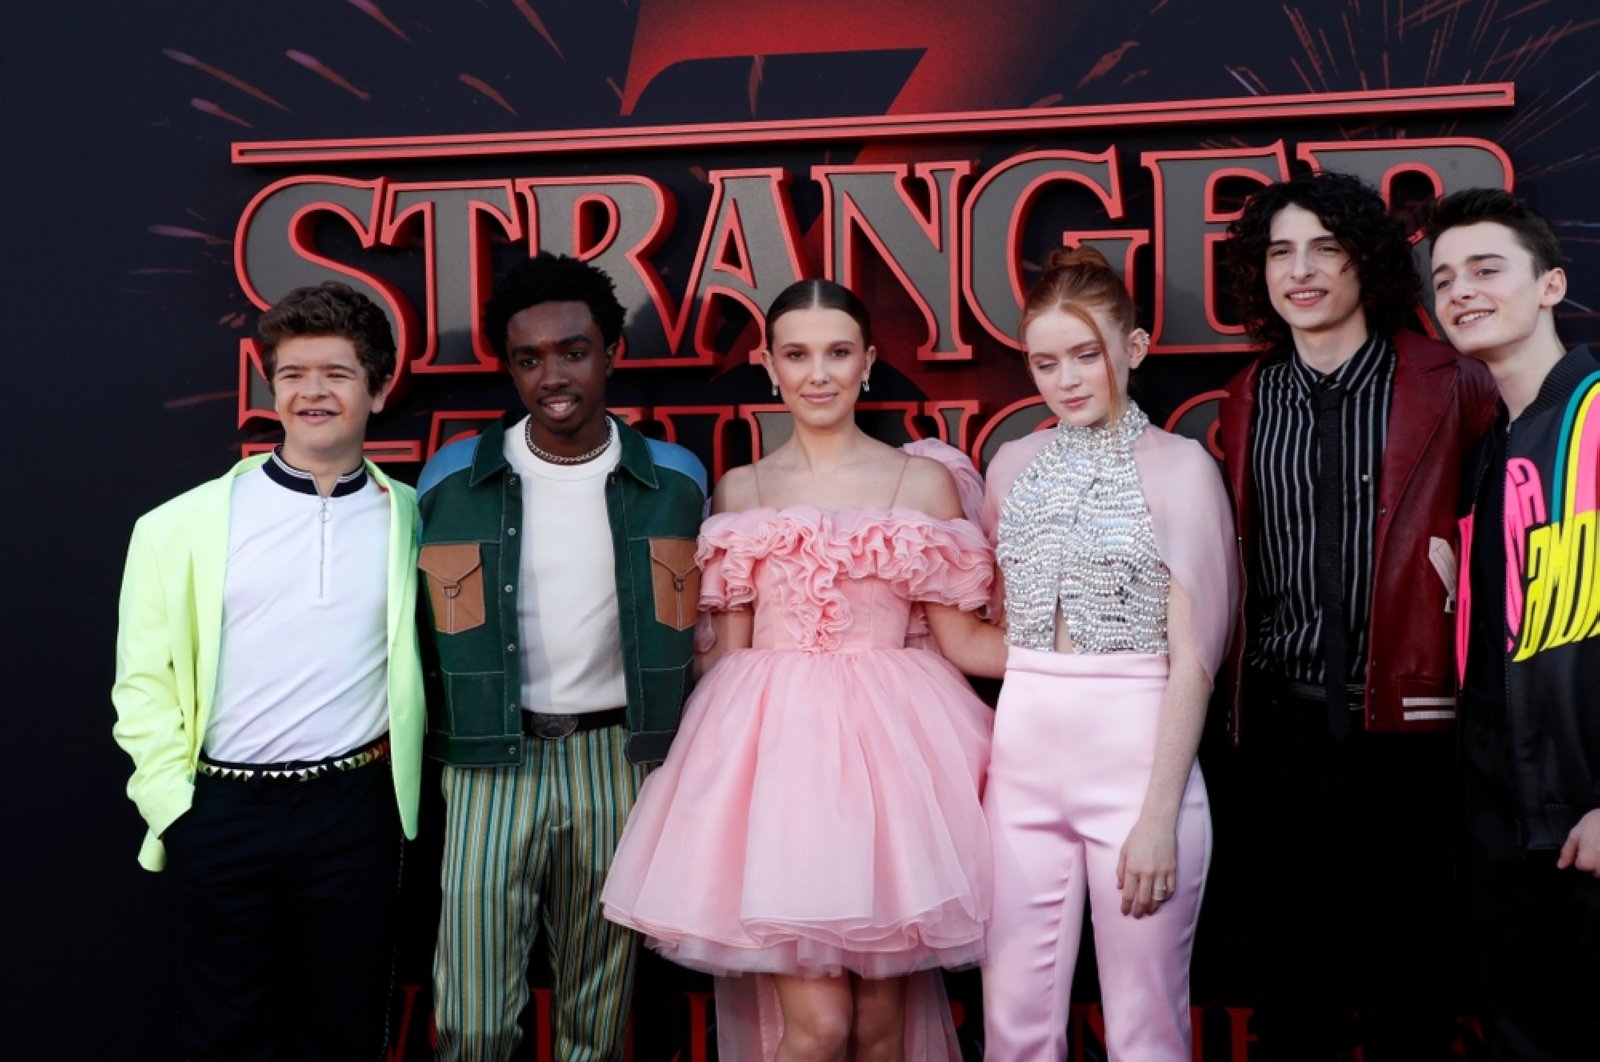 A 'Stranger Things' animated series is coming - Good Morning America